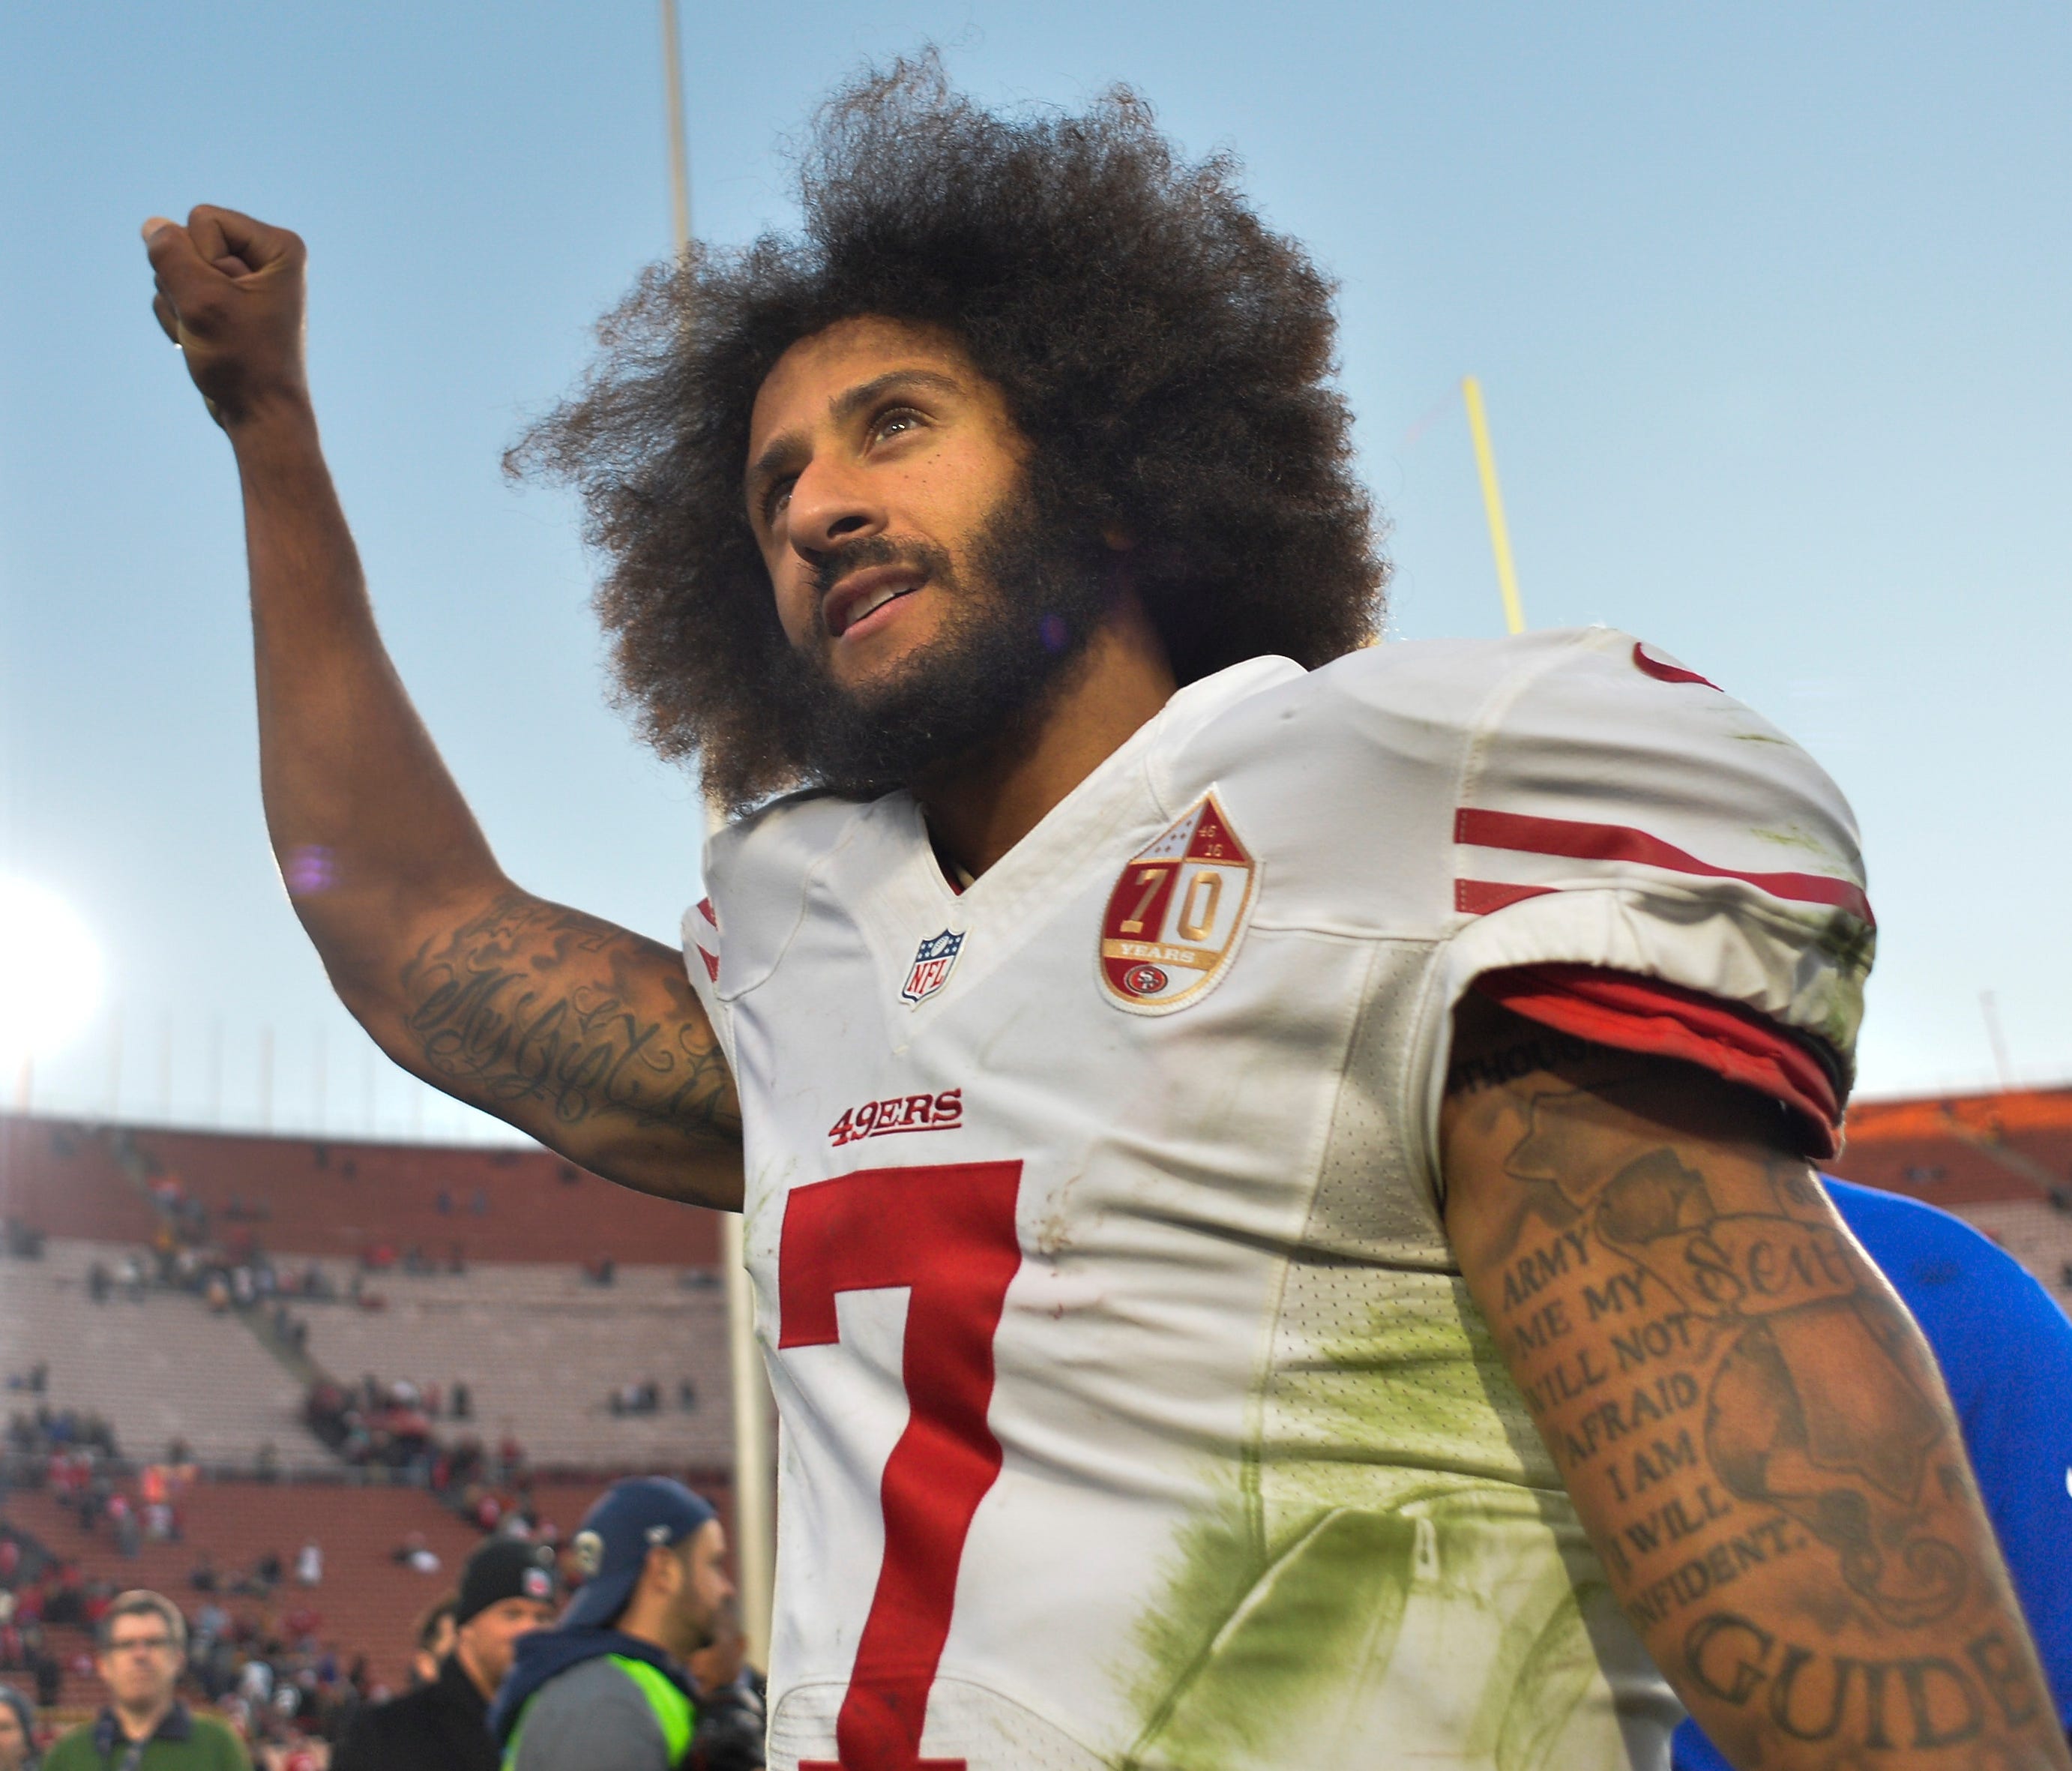 Free agent QB Colin Kaepernick is still waiting to learn if he'll play a seventh NFL season in 2017.